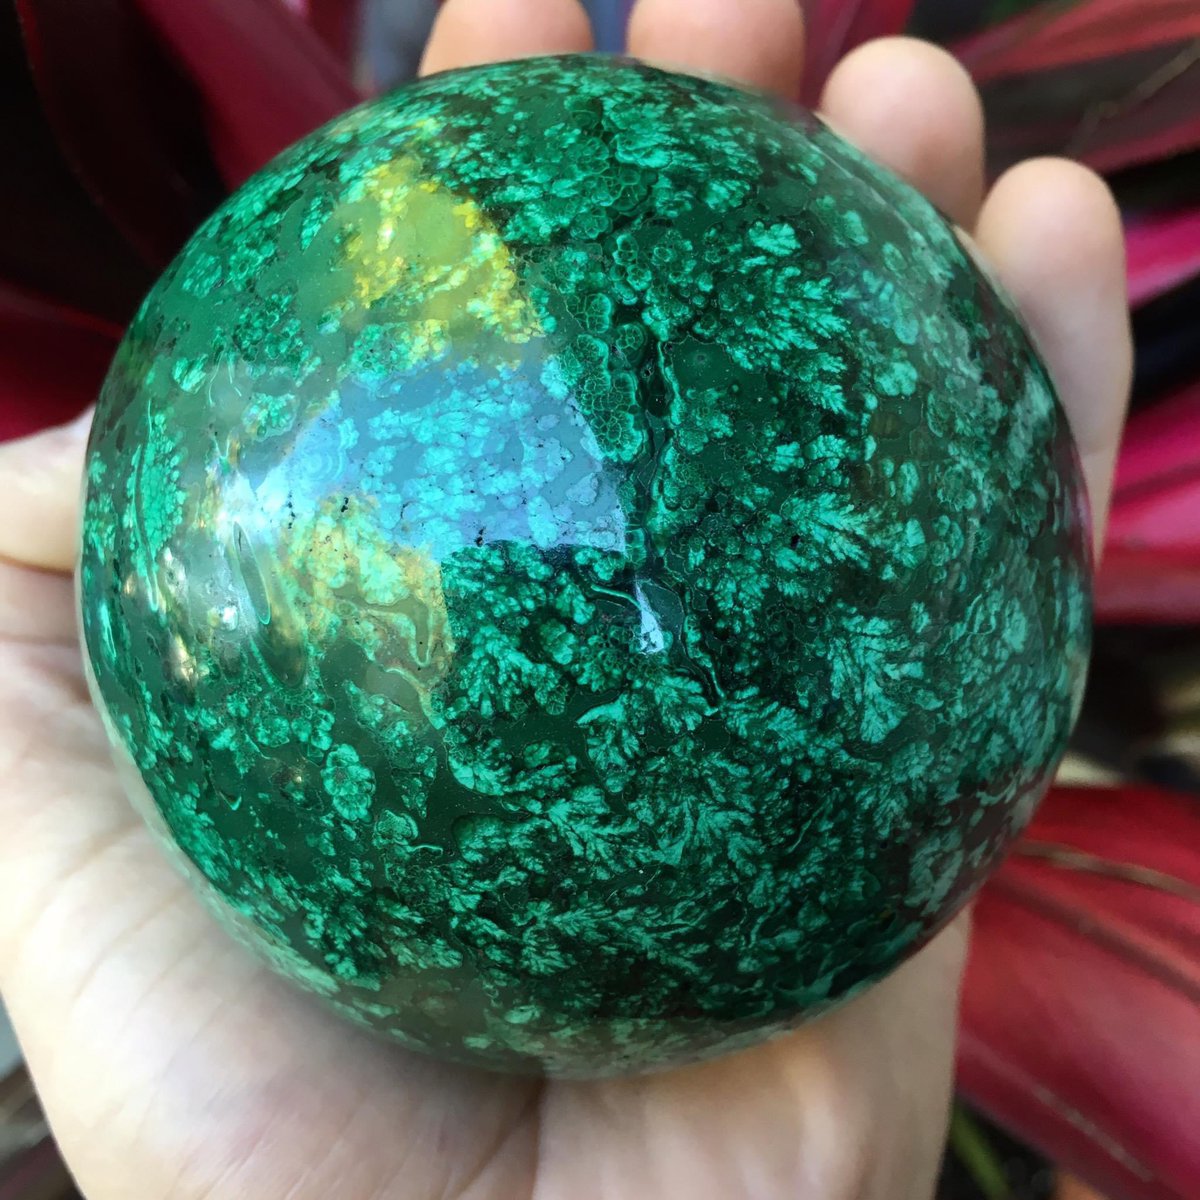 💚Stunning Malachite Crystal Sphere from the Congo⚜️ #malachite #minerals #crystals